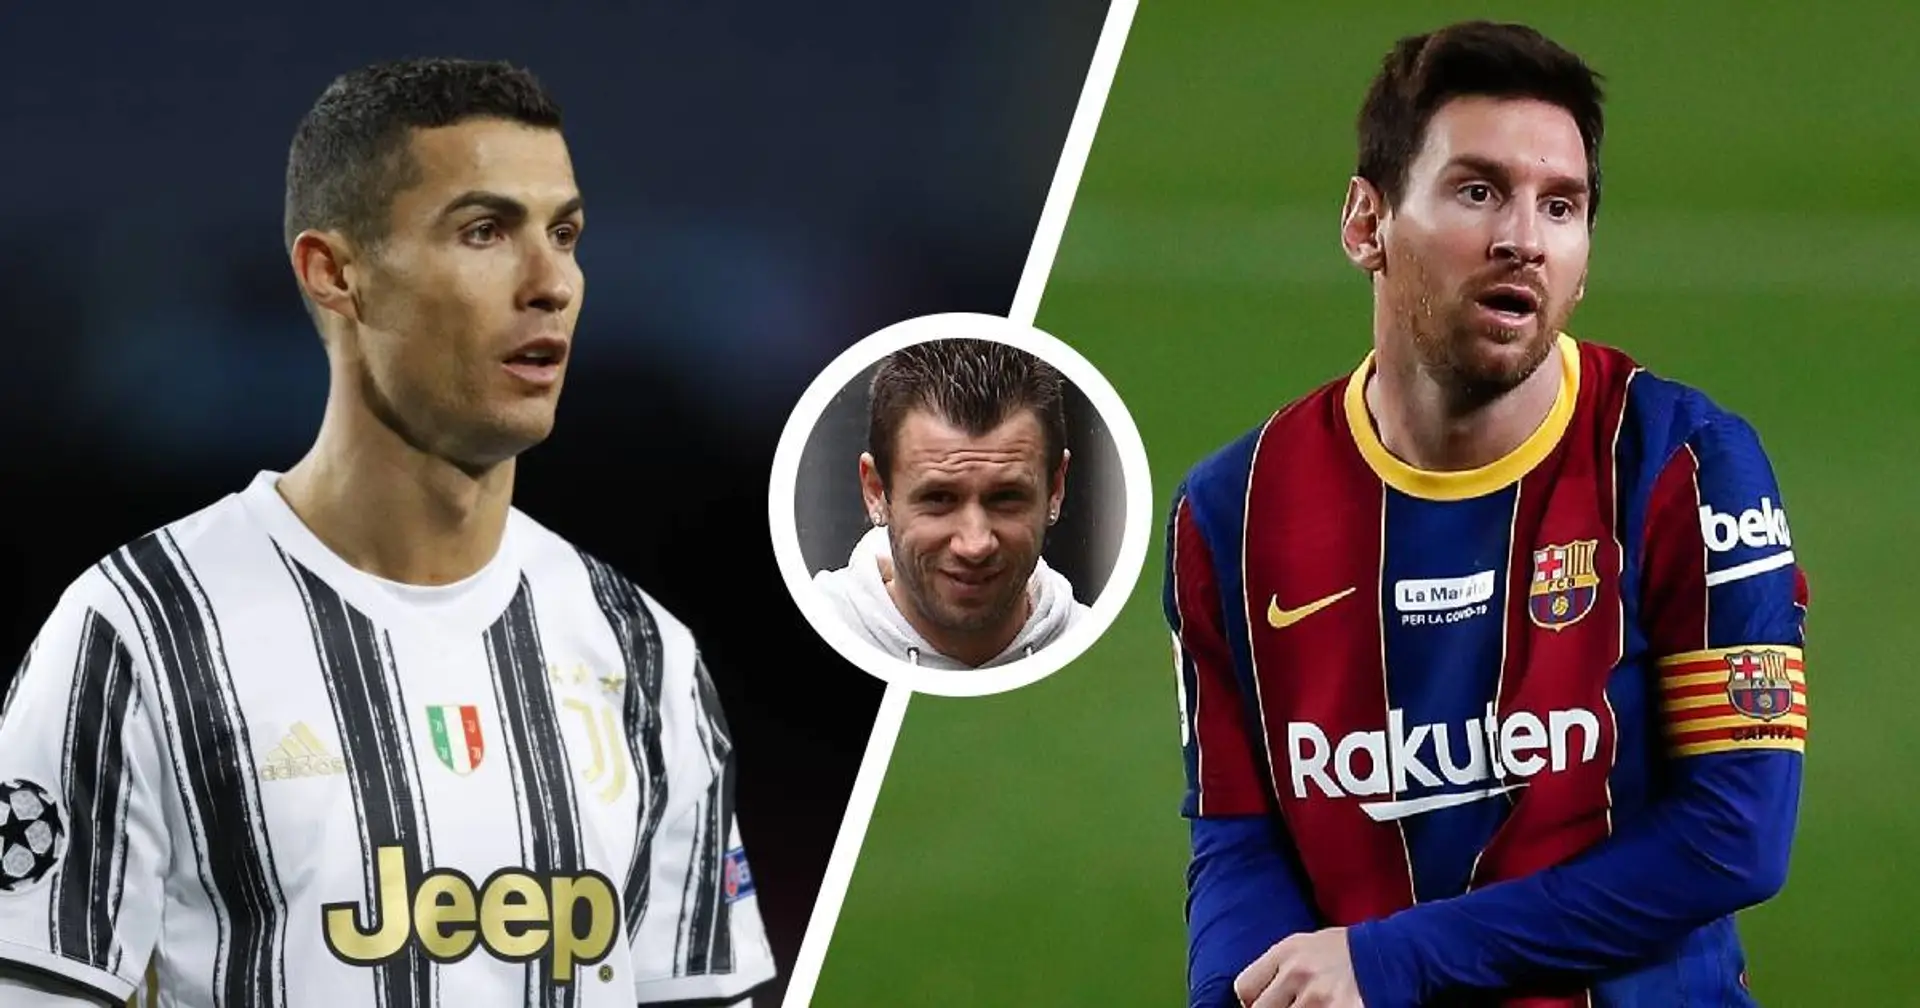 'Ronaldo is a manufactured talent but we'll never see again someone like Messi': Antonio Cassano